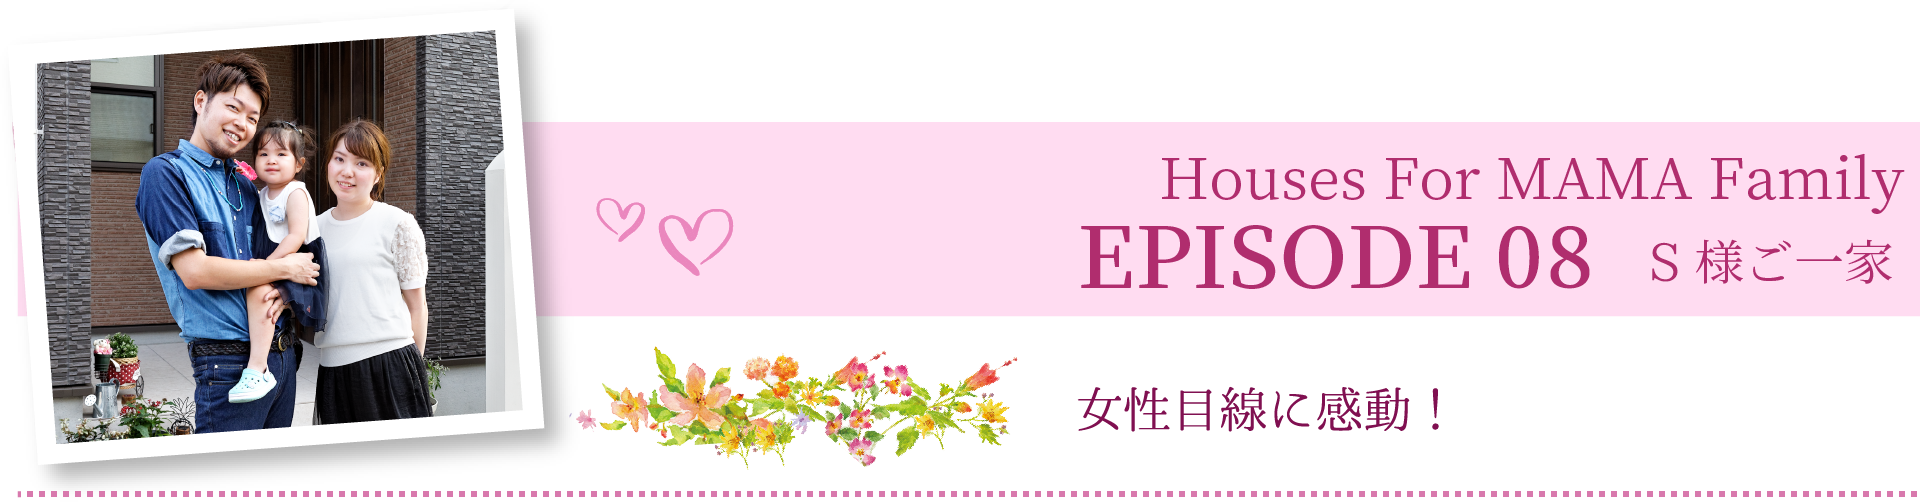 Houses For MAMA Family EPISODE 08 N様ご一家